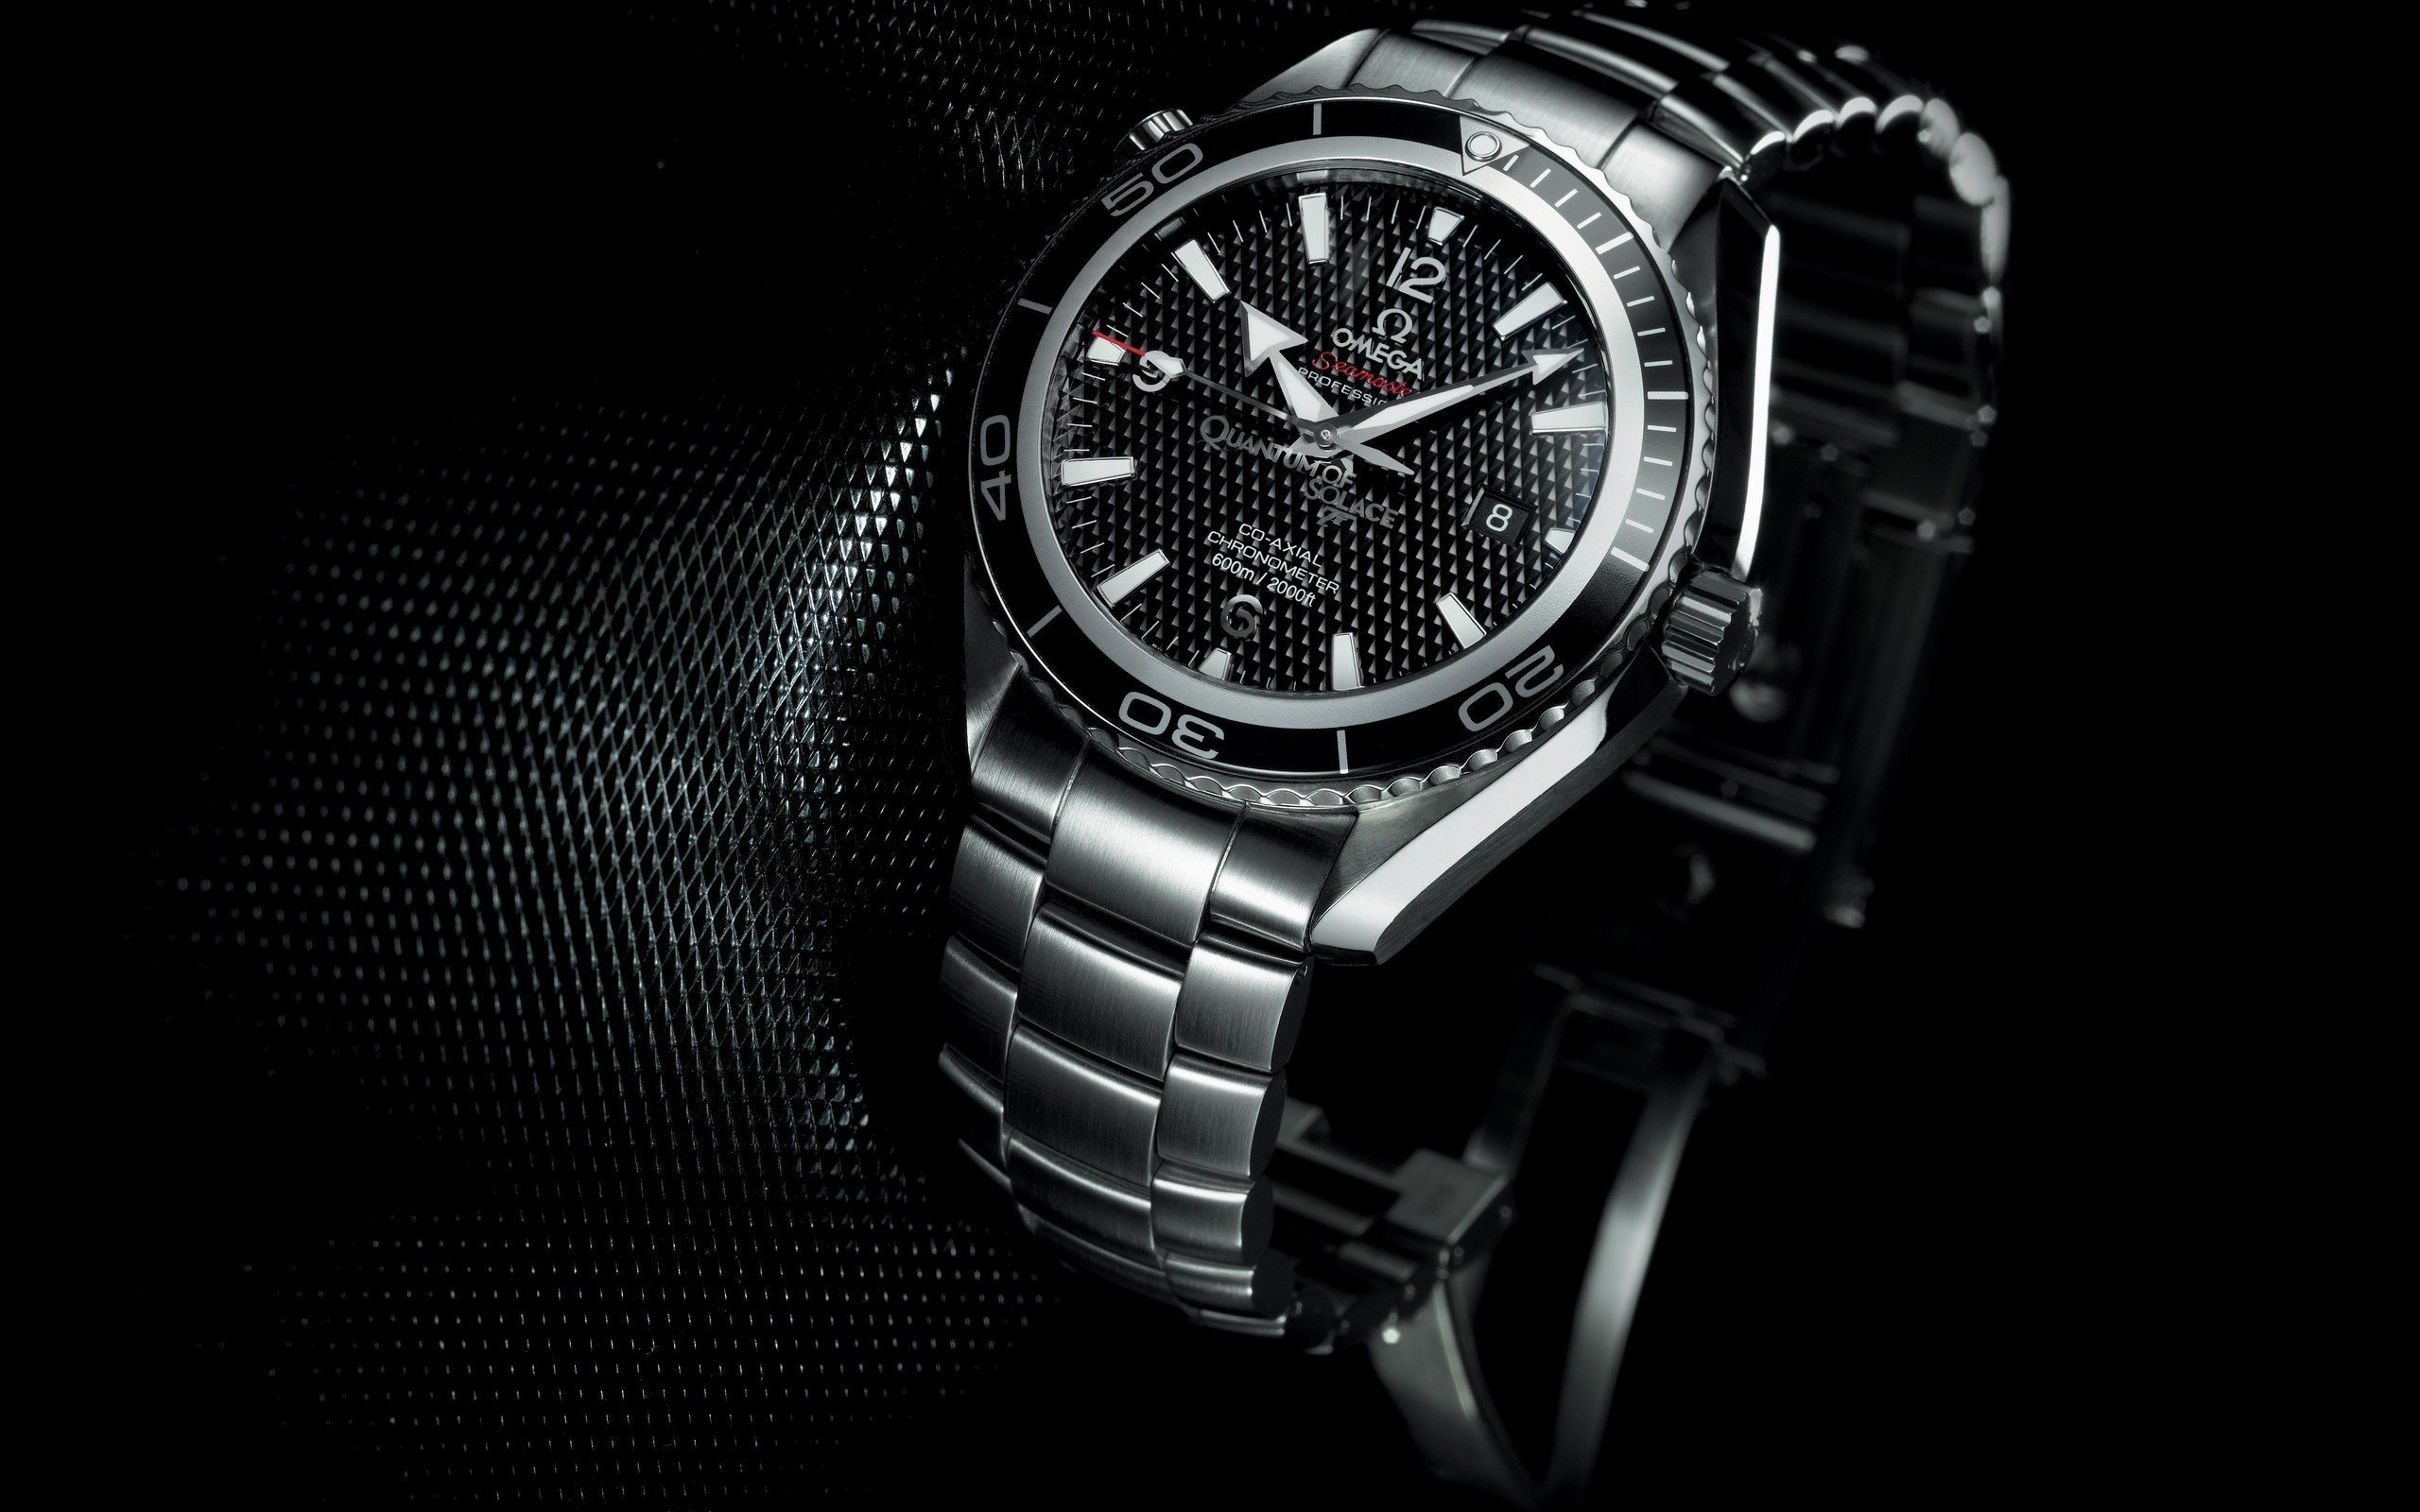 watch, Luxury watches Wallpaper HD / Desktop and Mobile Background